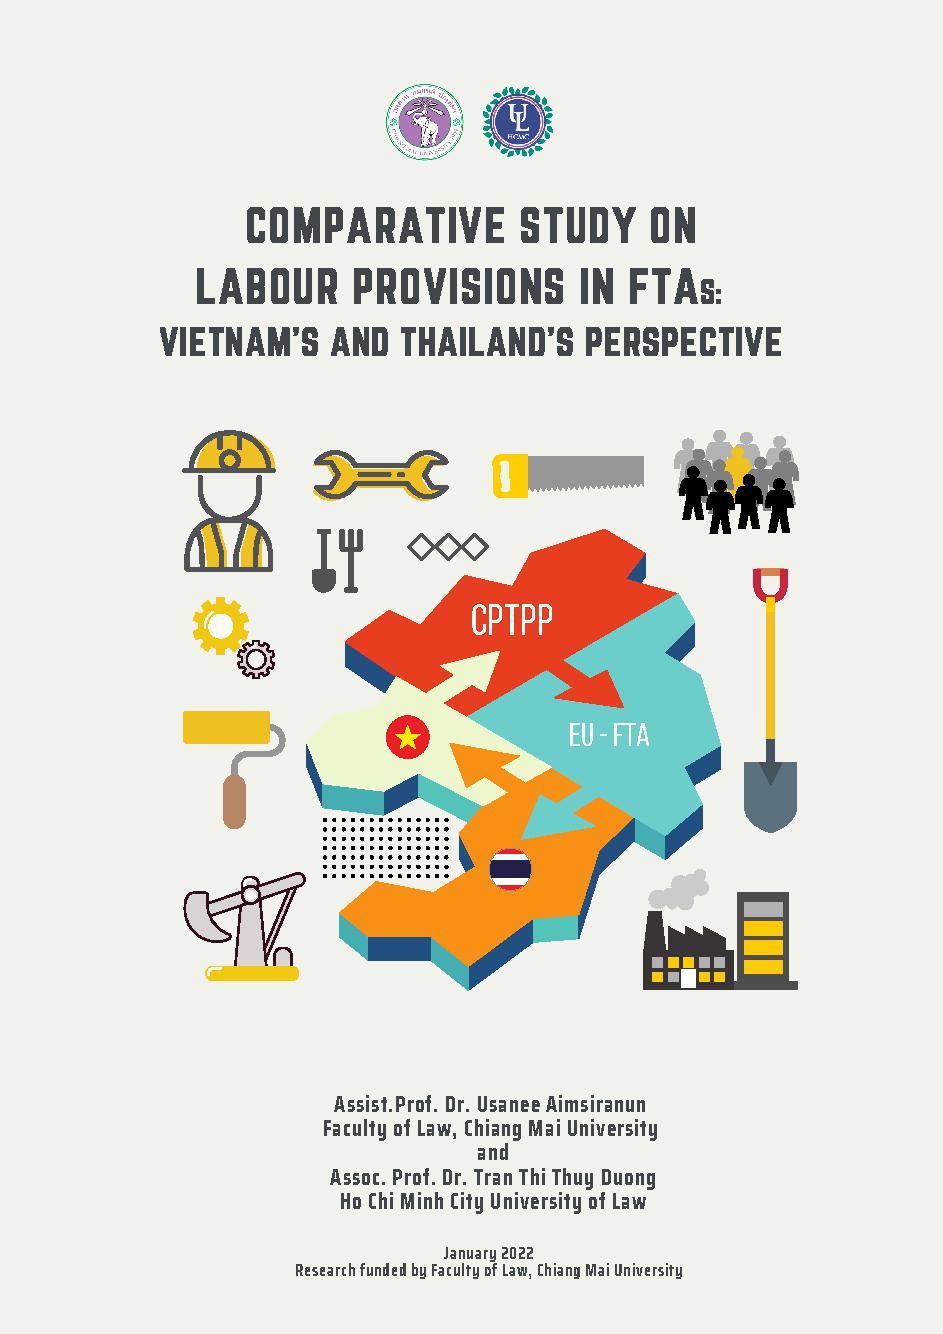 Comparative study on labour provisions in FTAs: Vietnam's and Thailan's Perspective